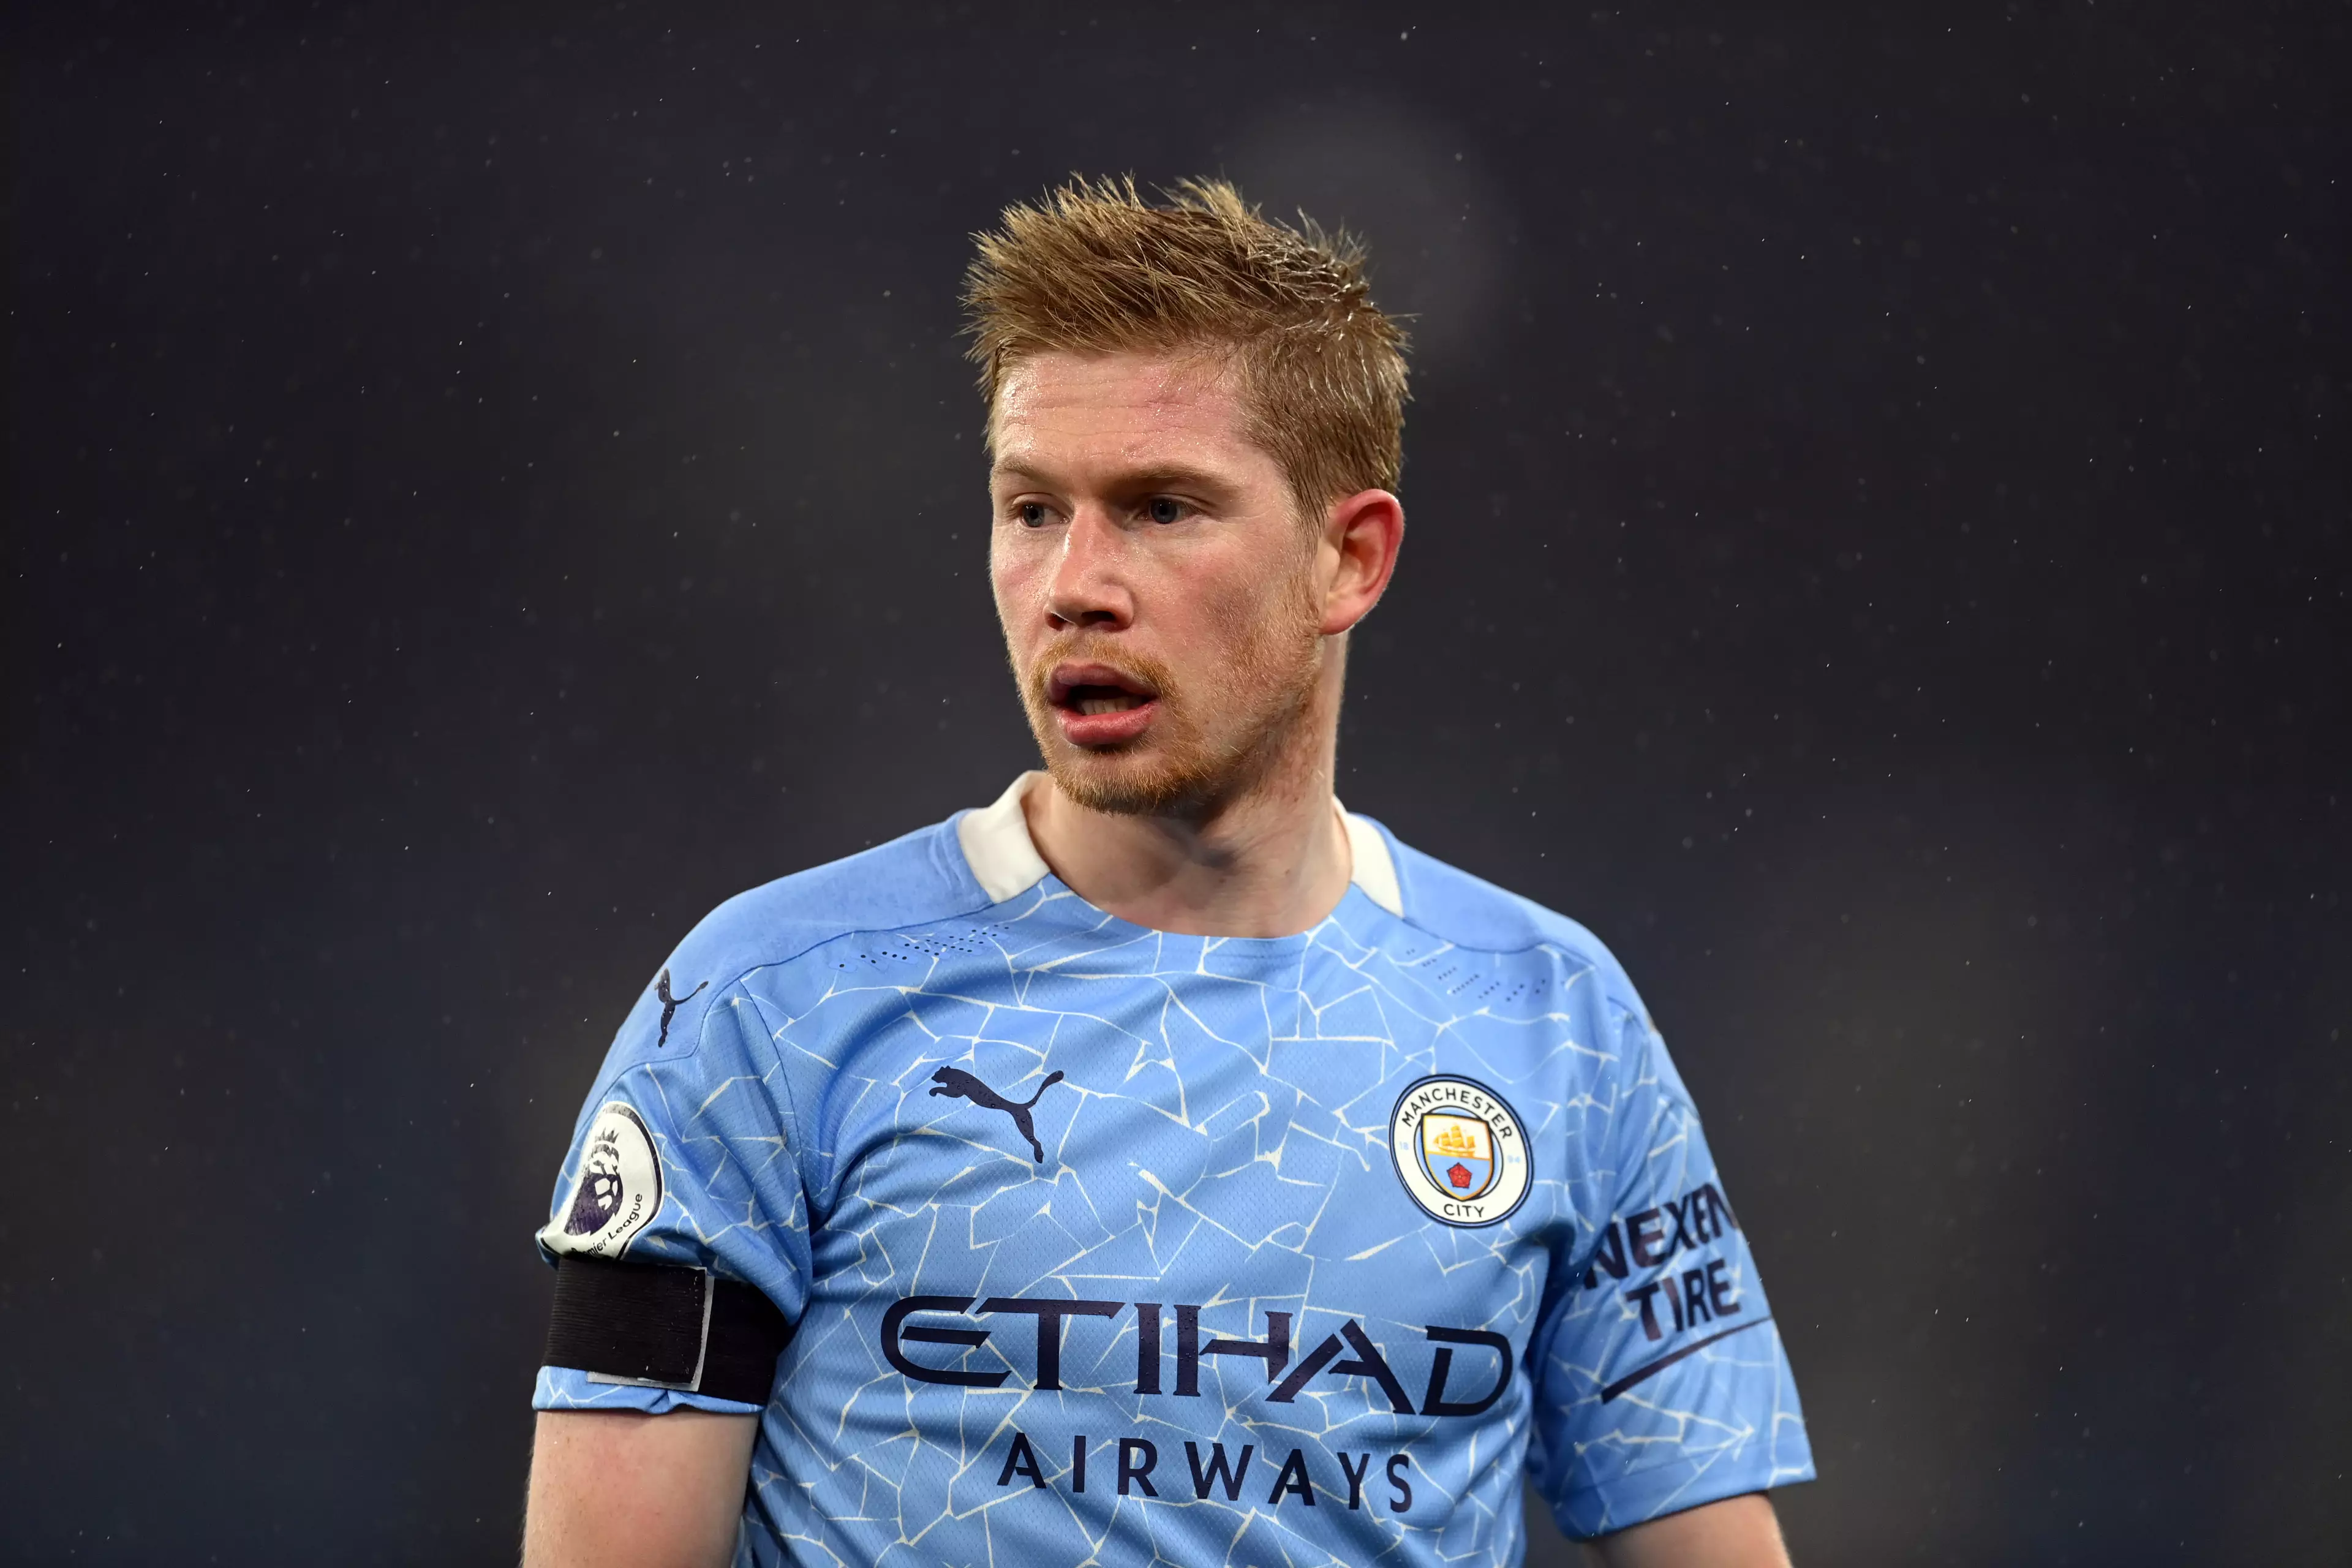 Kevin De Bruyne will be fit to start after being forced off in the FA Cup semi-final